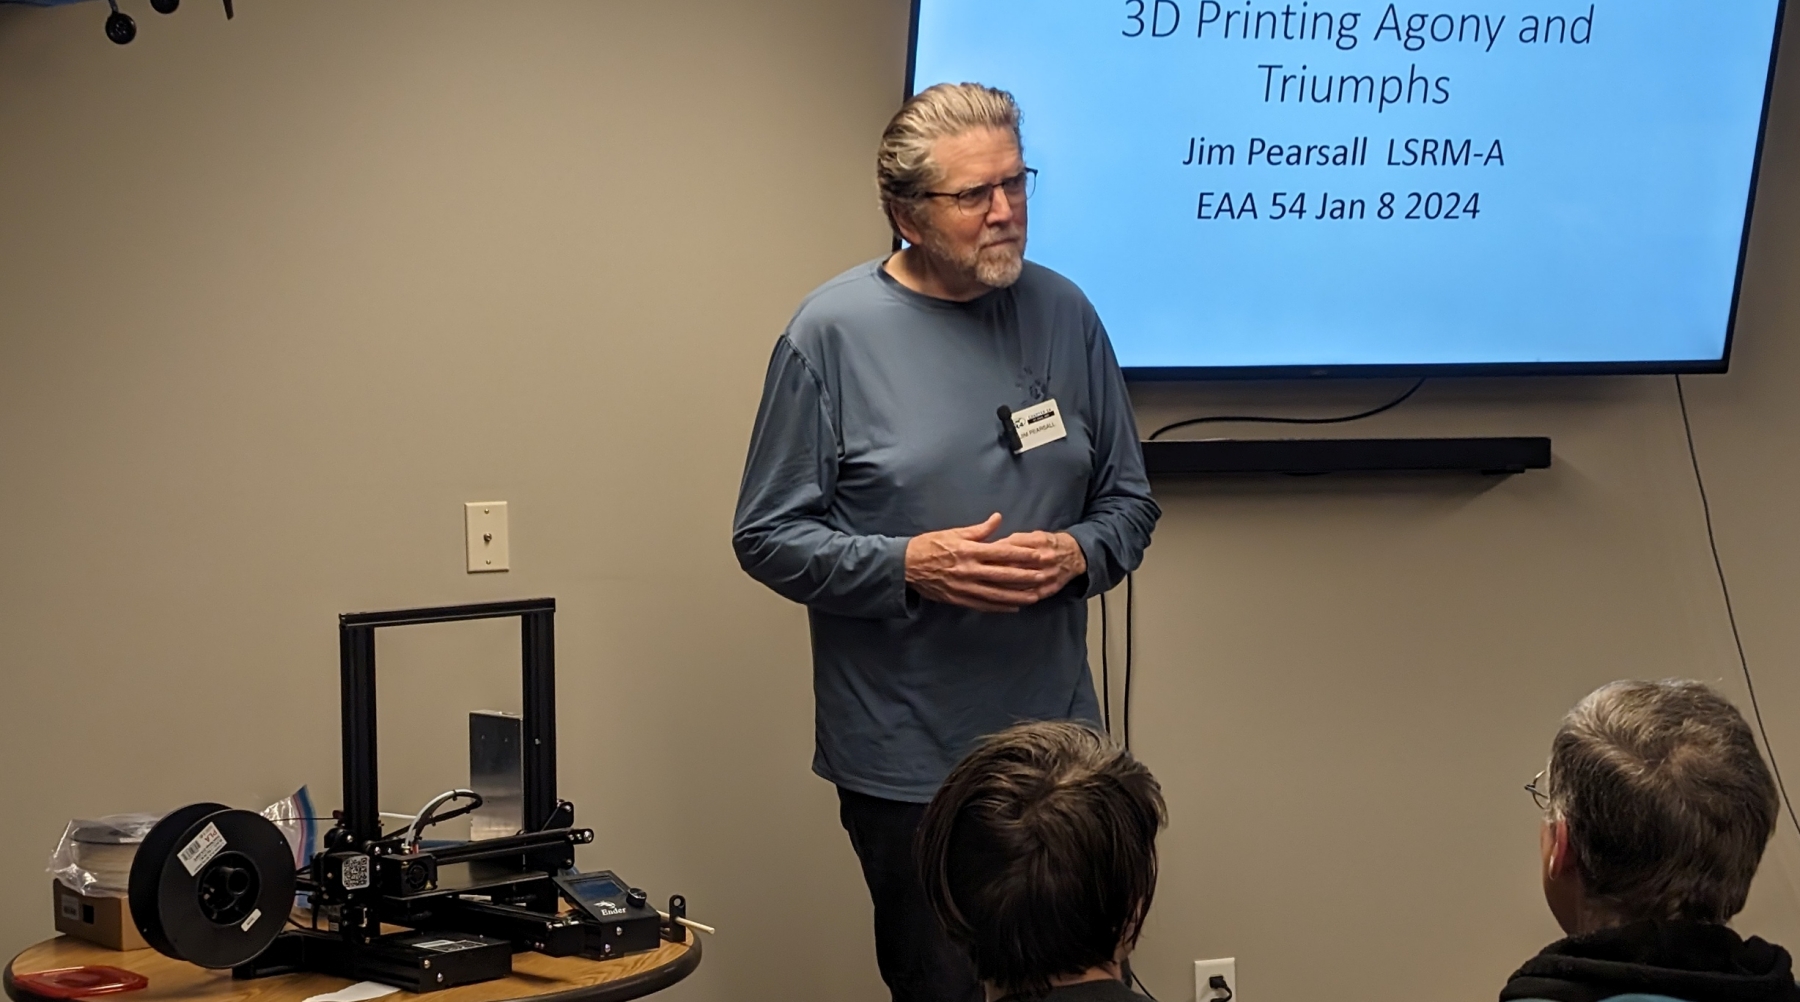 Jim Pearsall demonstrates his 3D printer and discusses aviation applications  at the January 8, 2024 meeting.